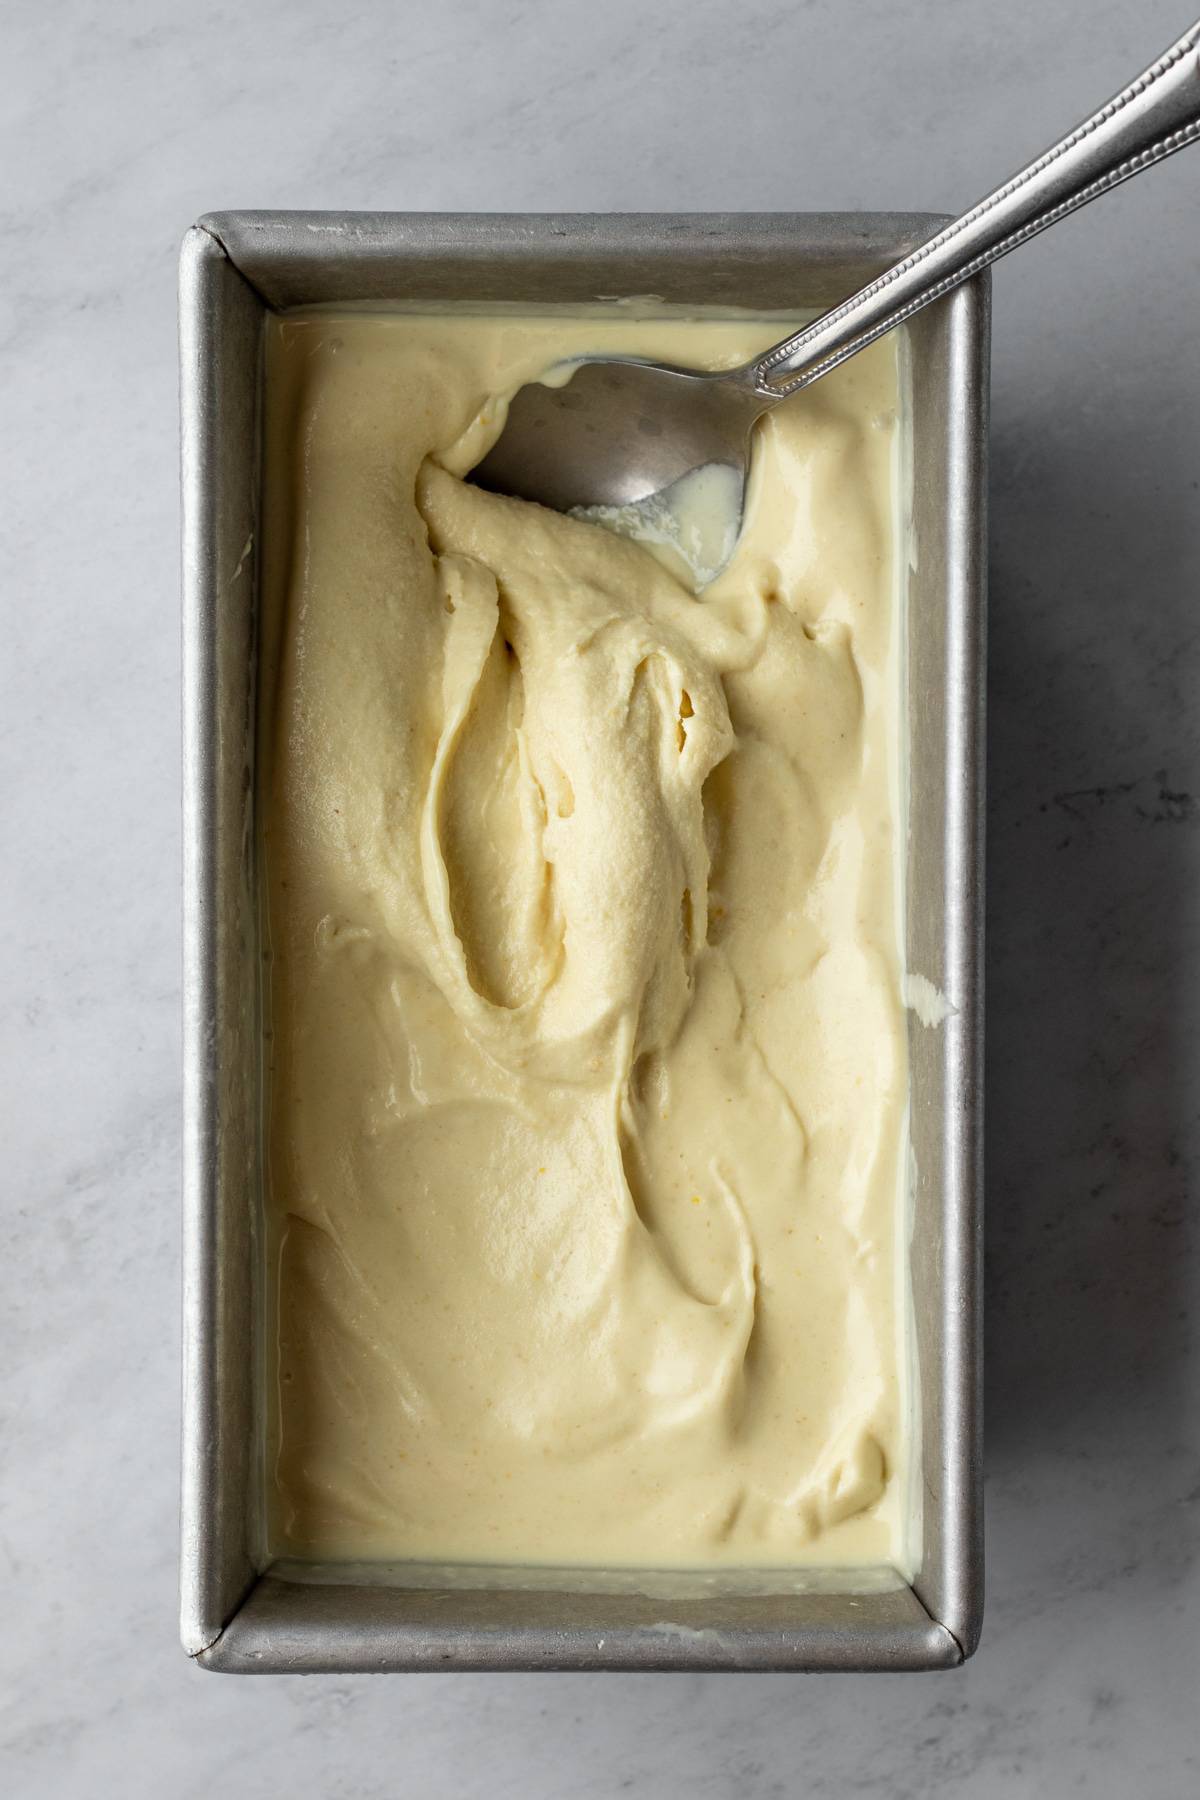 just churned lemon ice cream in a loaf pan